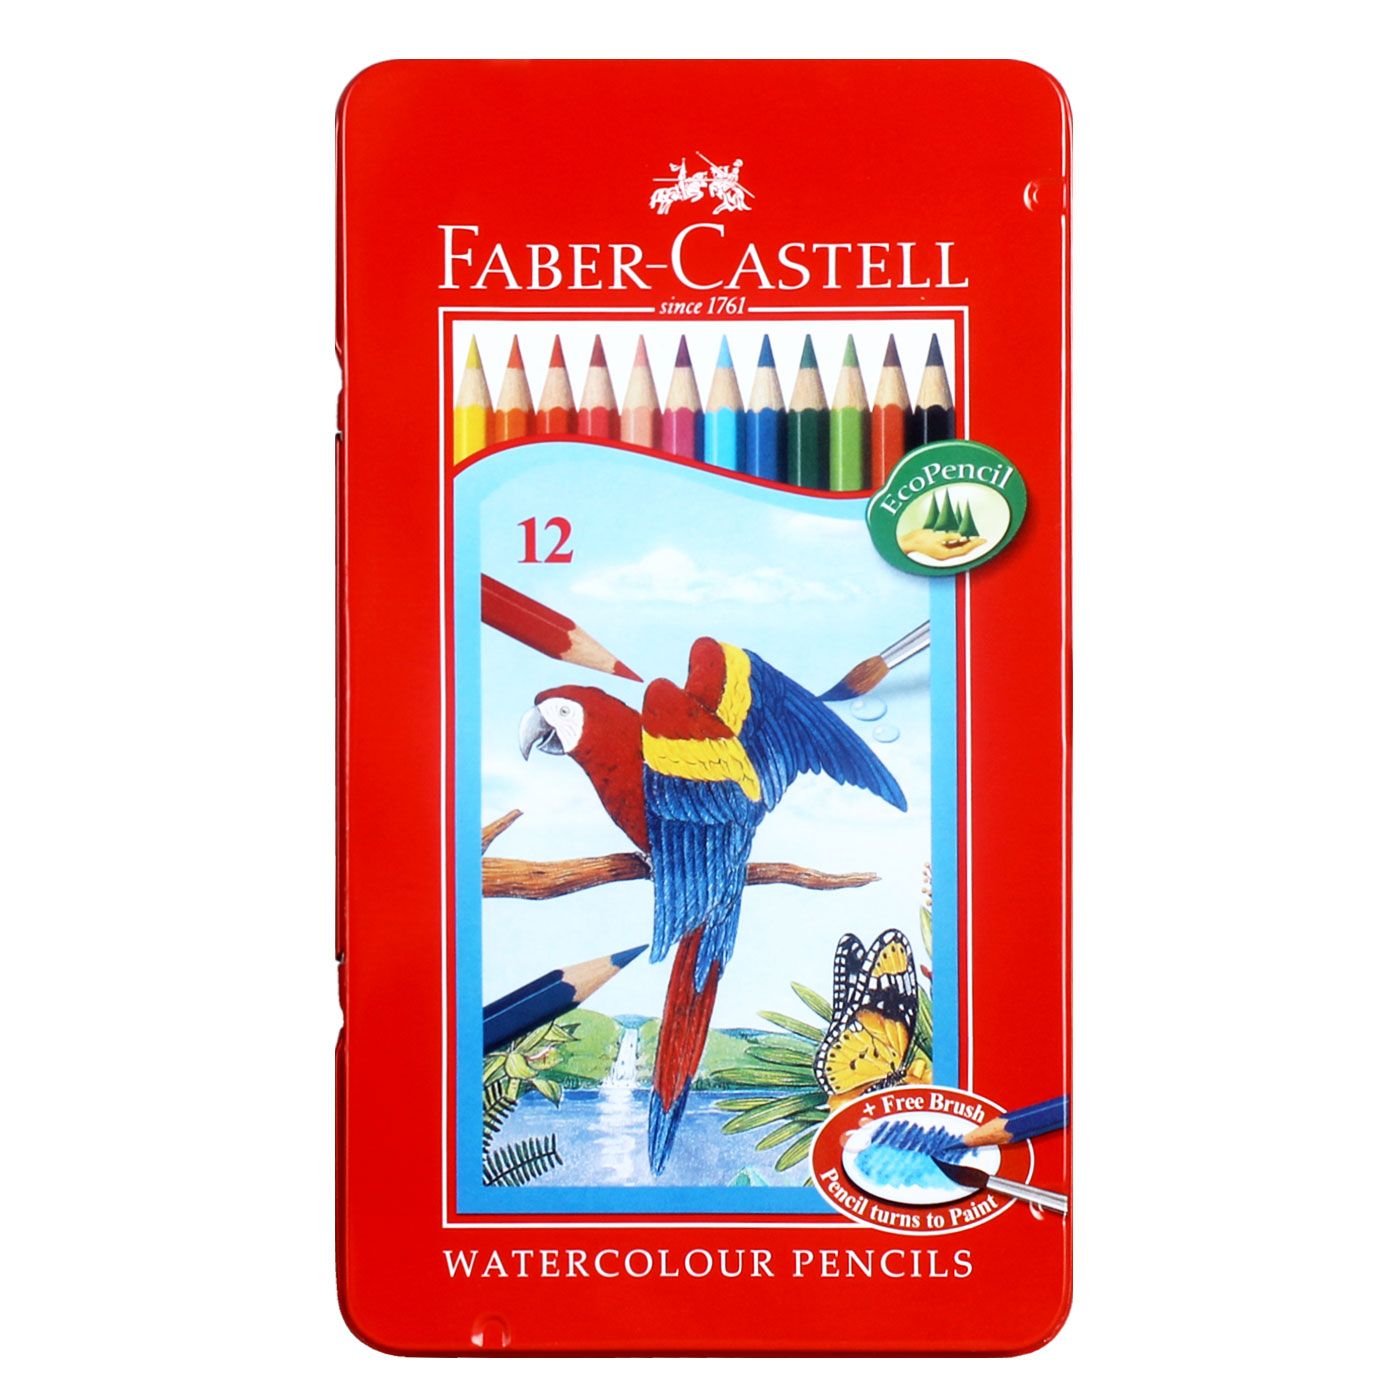 Faber Castell Watercolour Pencils in Tin Case (Isi 12) - 1